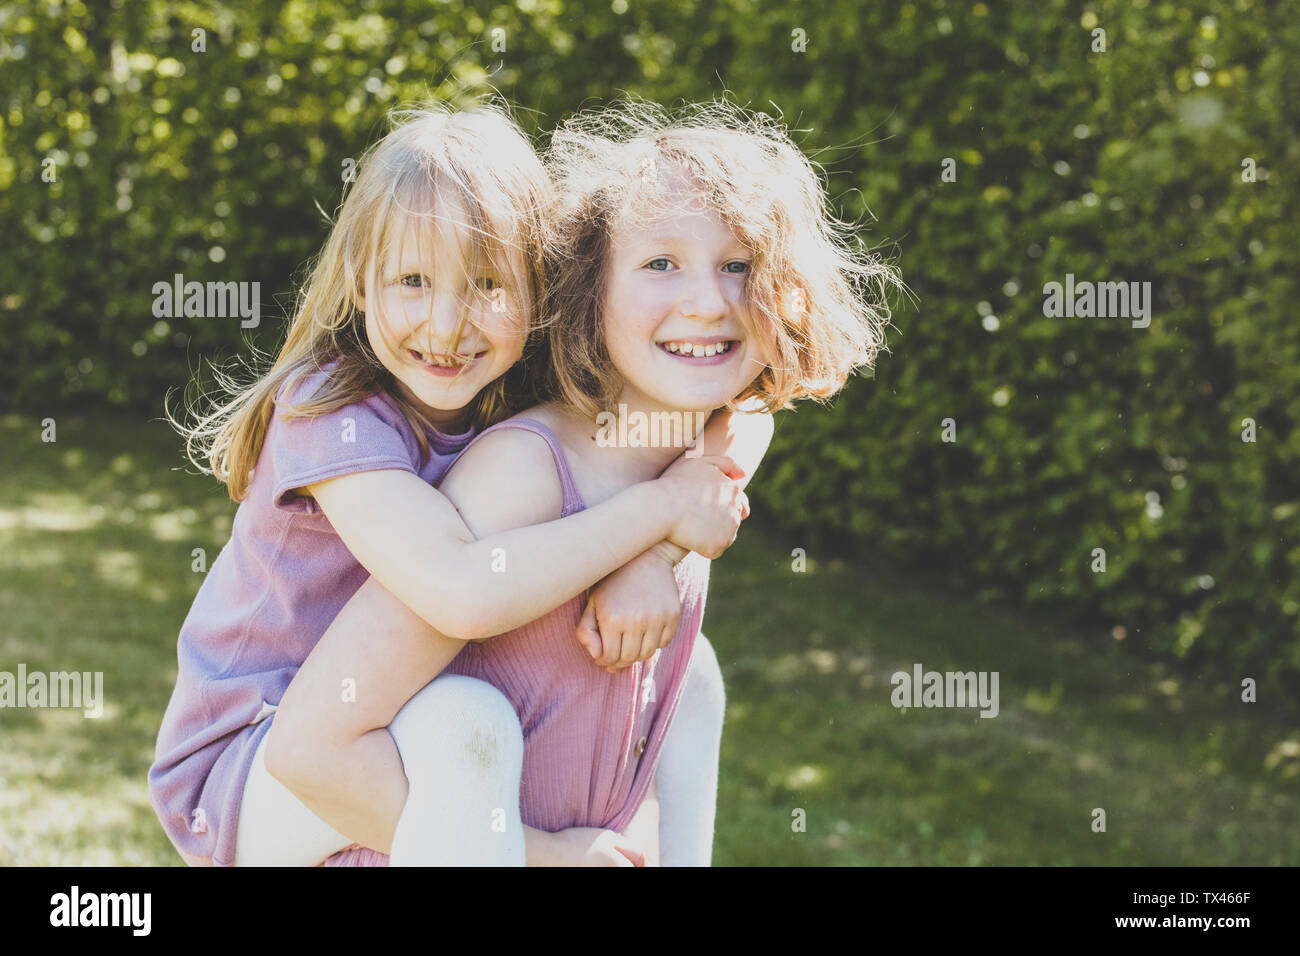 A big sister carrying her small sister, Girl power Stock Photo